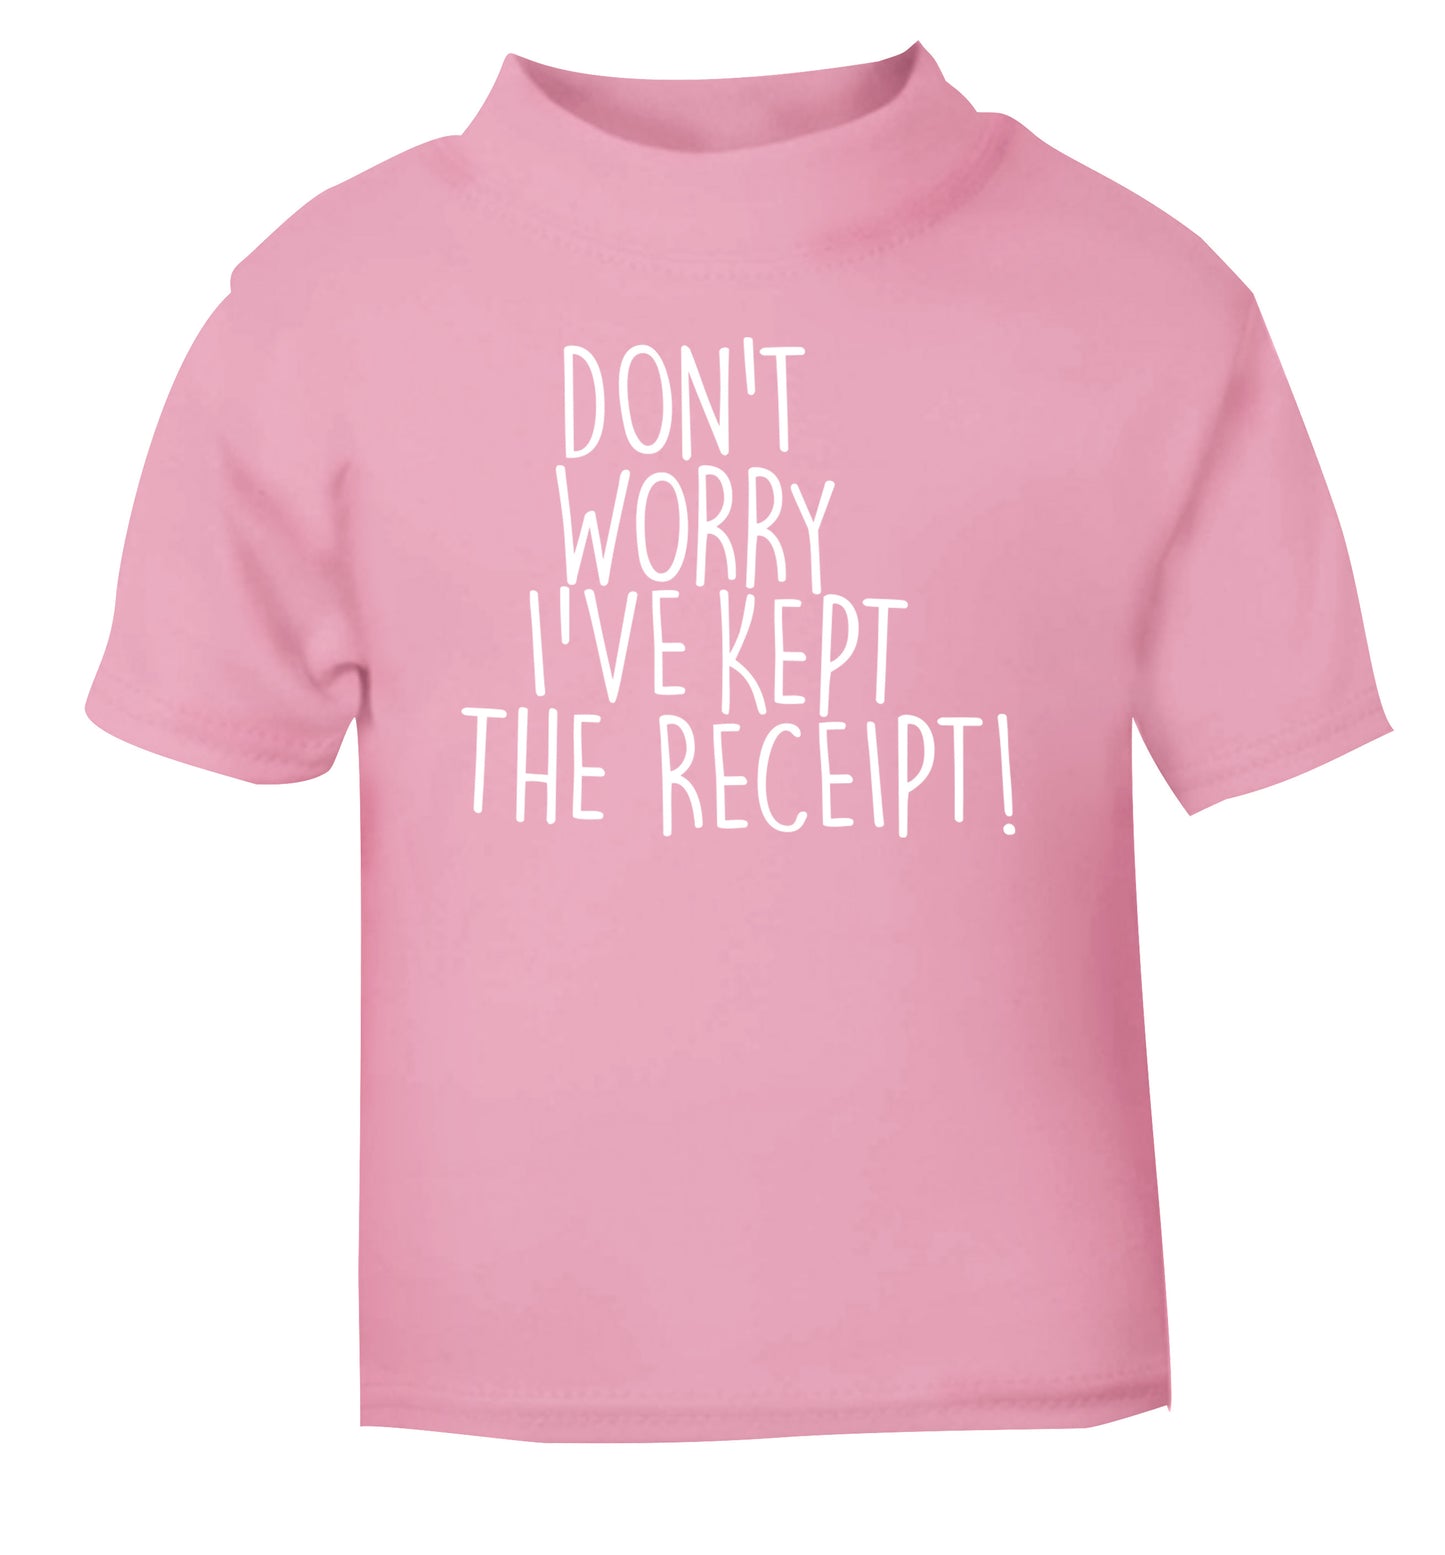 Don't Worry I've Kept the Receipt light pink Baby Toddler Tshirt 2 Years